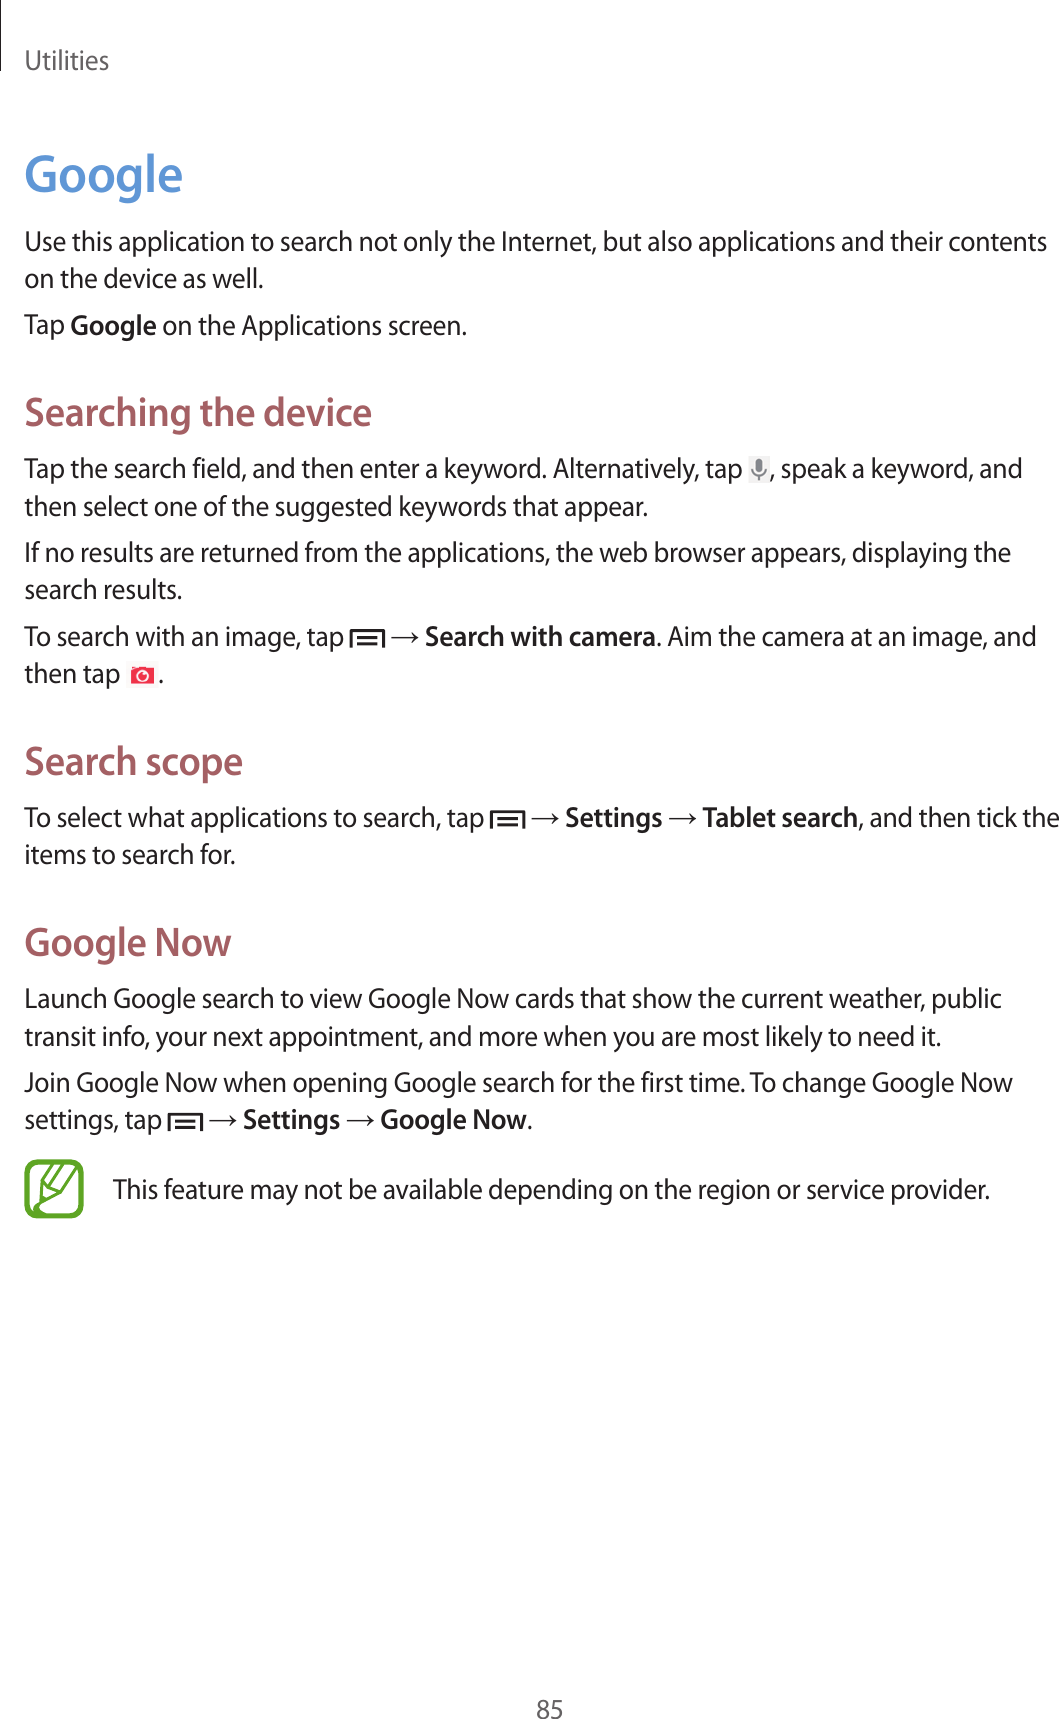 Utilities85GoogleUse this application to search not only the Internet, but also applications and their contents on the device as well.Tap Google on the Applications screen.Searching the deviceTap the search field, and then enter a keyword. Alternatively, tap  , speak a keyword, and then select one of the suggested keywords that appear.If no results are returned from the applications, the web browser appears, displaying the search results.To search with an image, tap   → Search with camera. Aim the camera at an image, and then tap  .Search scopeTo select what applications to search, tap   → Settings → Tablet search, and then tick the items to search for.Google NowLaunch Google search to view Google Now cards that show the current weather, public transit info, your next appointment, and more when you are most likely to need it.Join Google Now when opening Google search for the first time. To change Google Now settings, tap   → Settings → Google Now.This feature may not be available depending on the region or service provider.